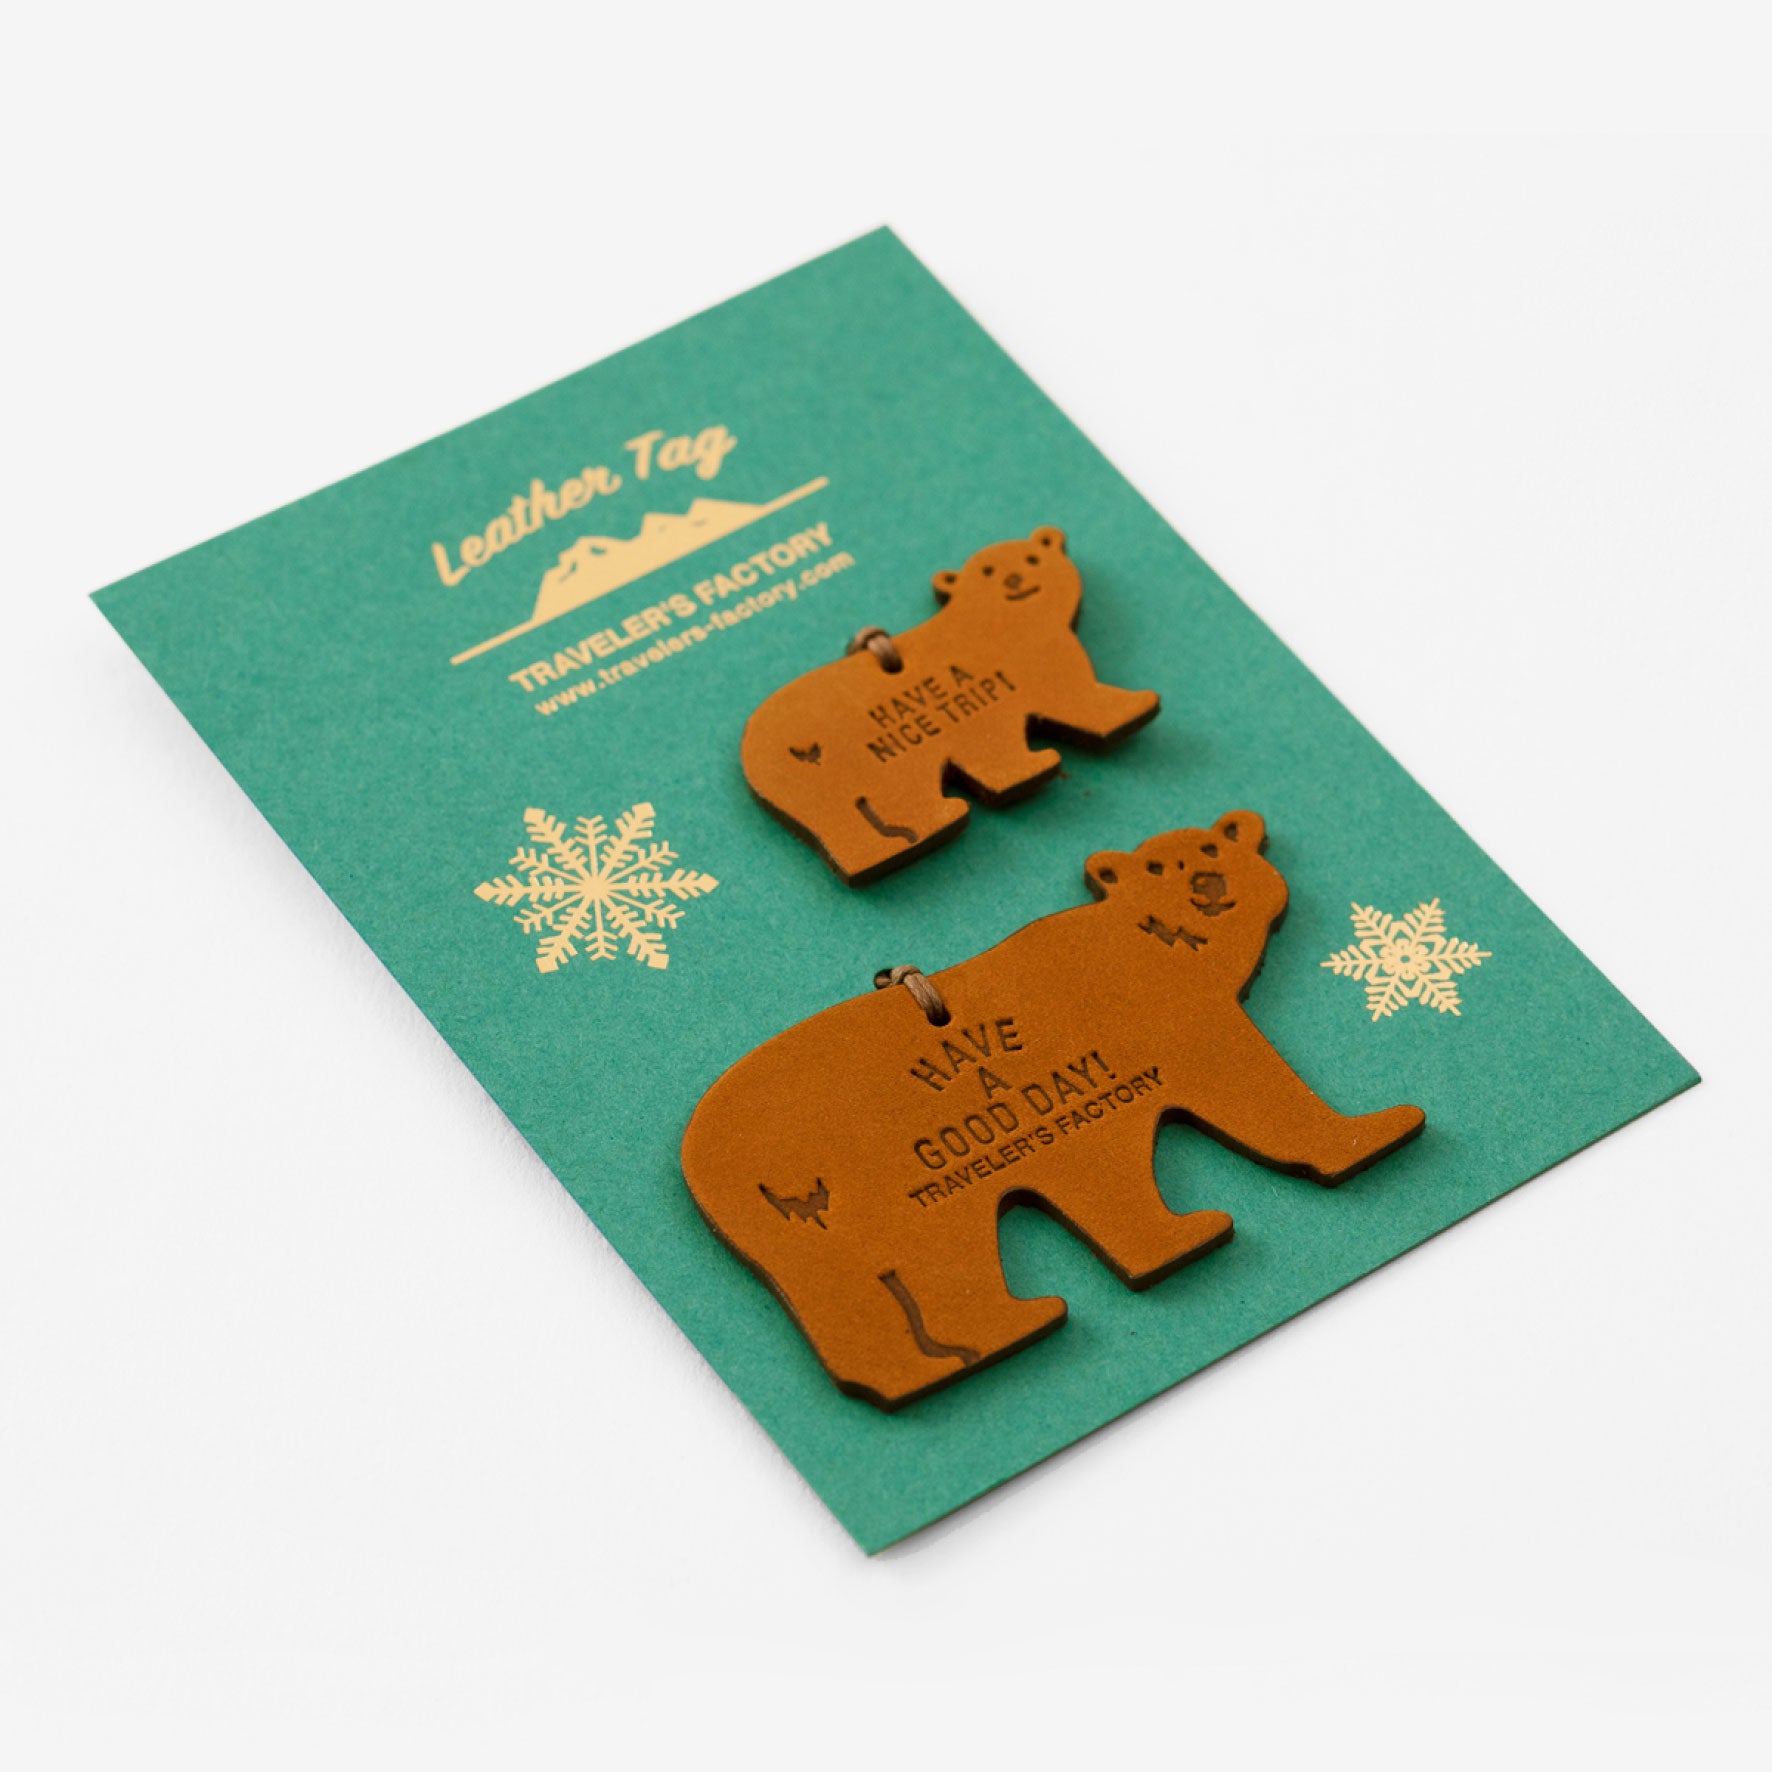 Traveler's Factory - Leather Tag - Bear